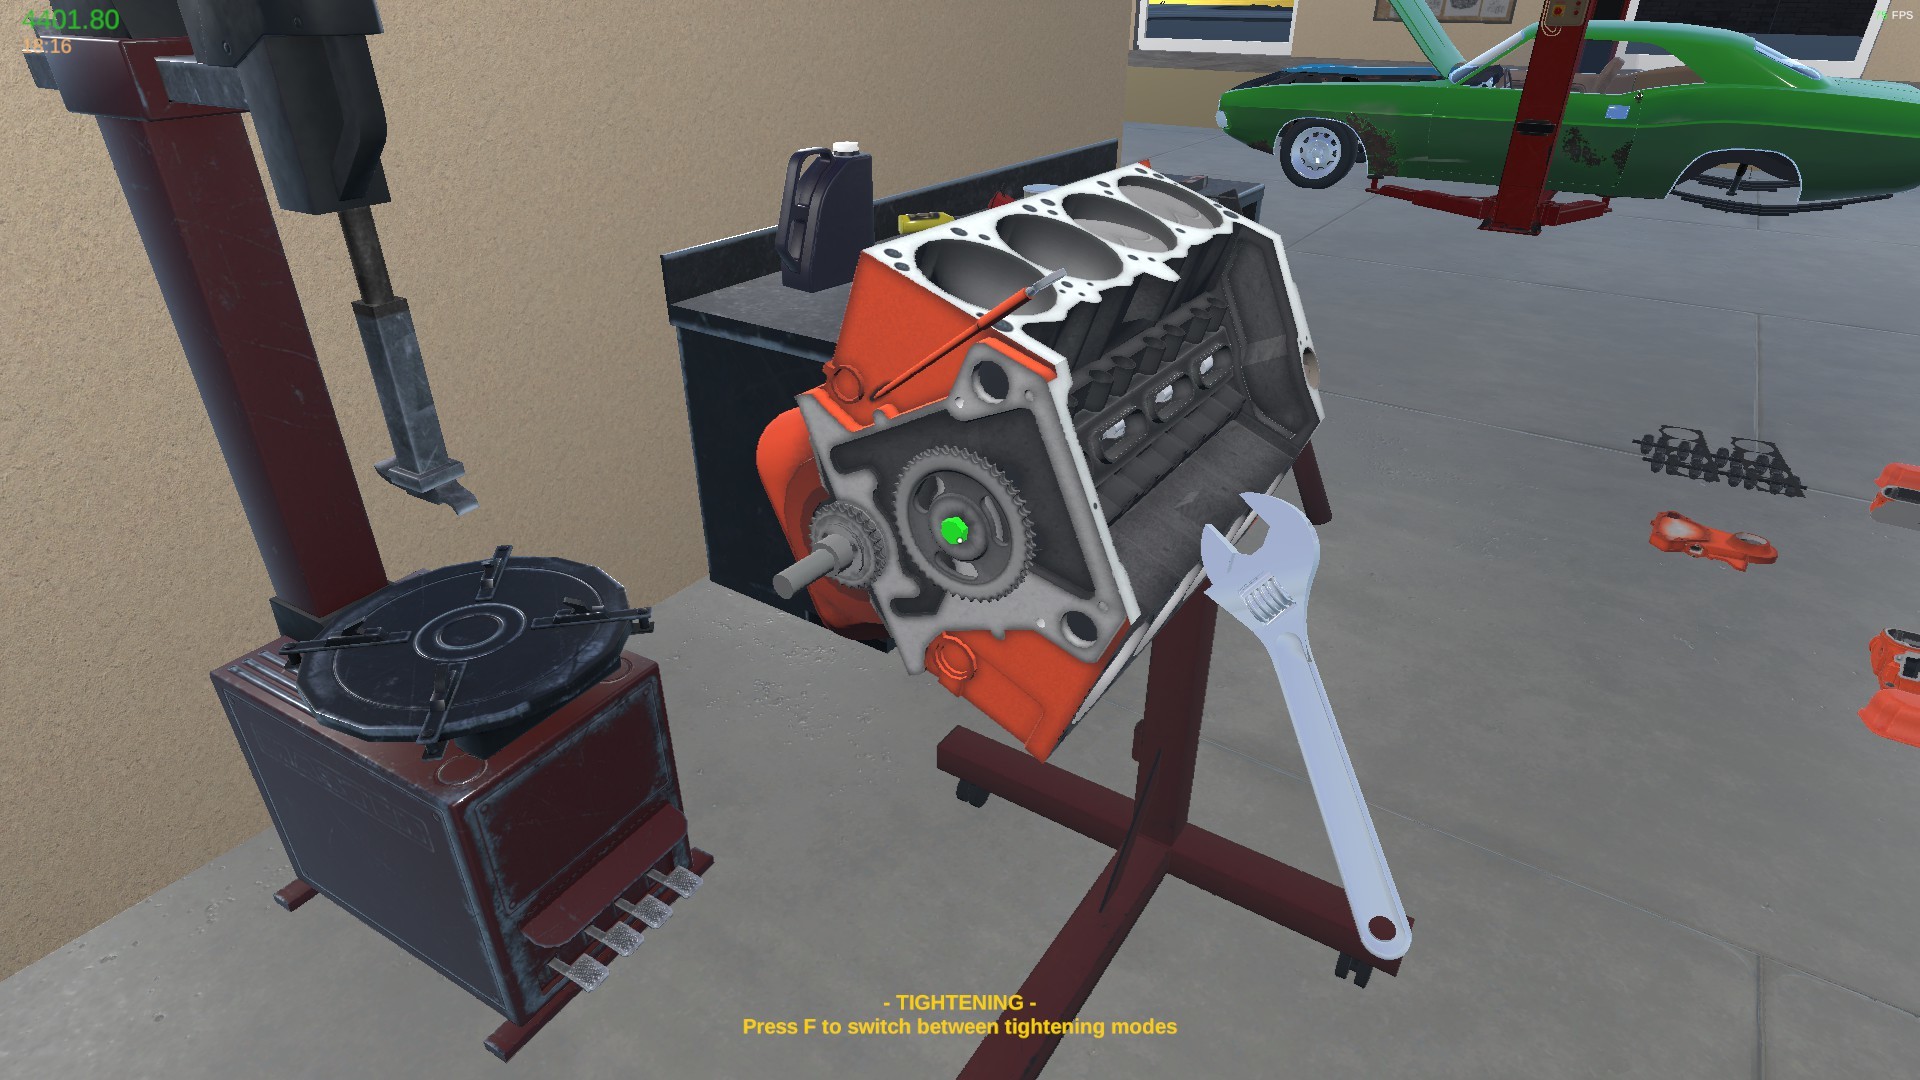 My Garage How to build a V8 engine guide - 2. Engine Block - 8D6F188